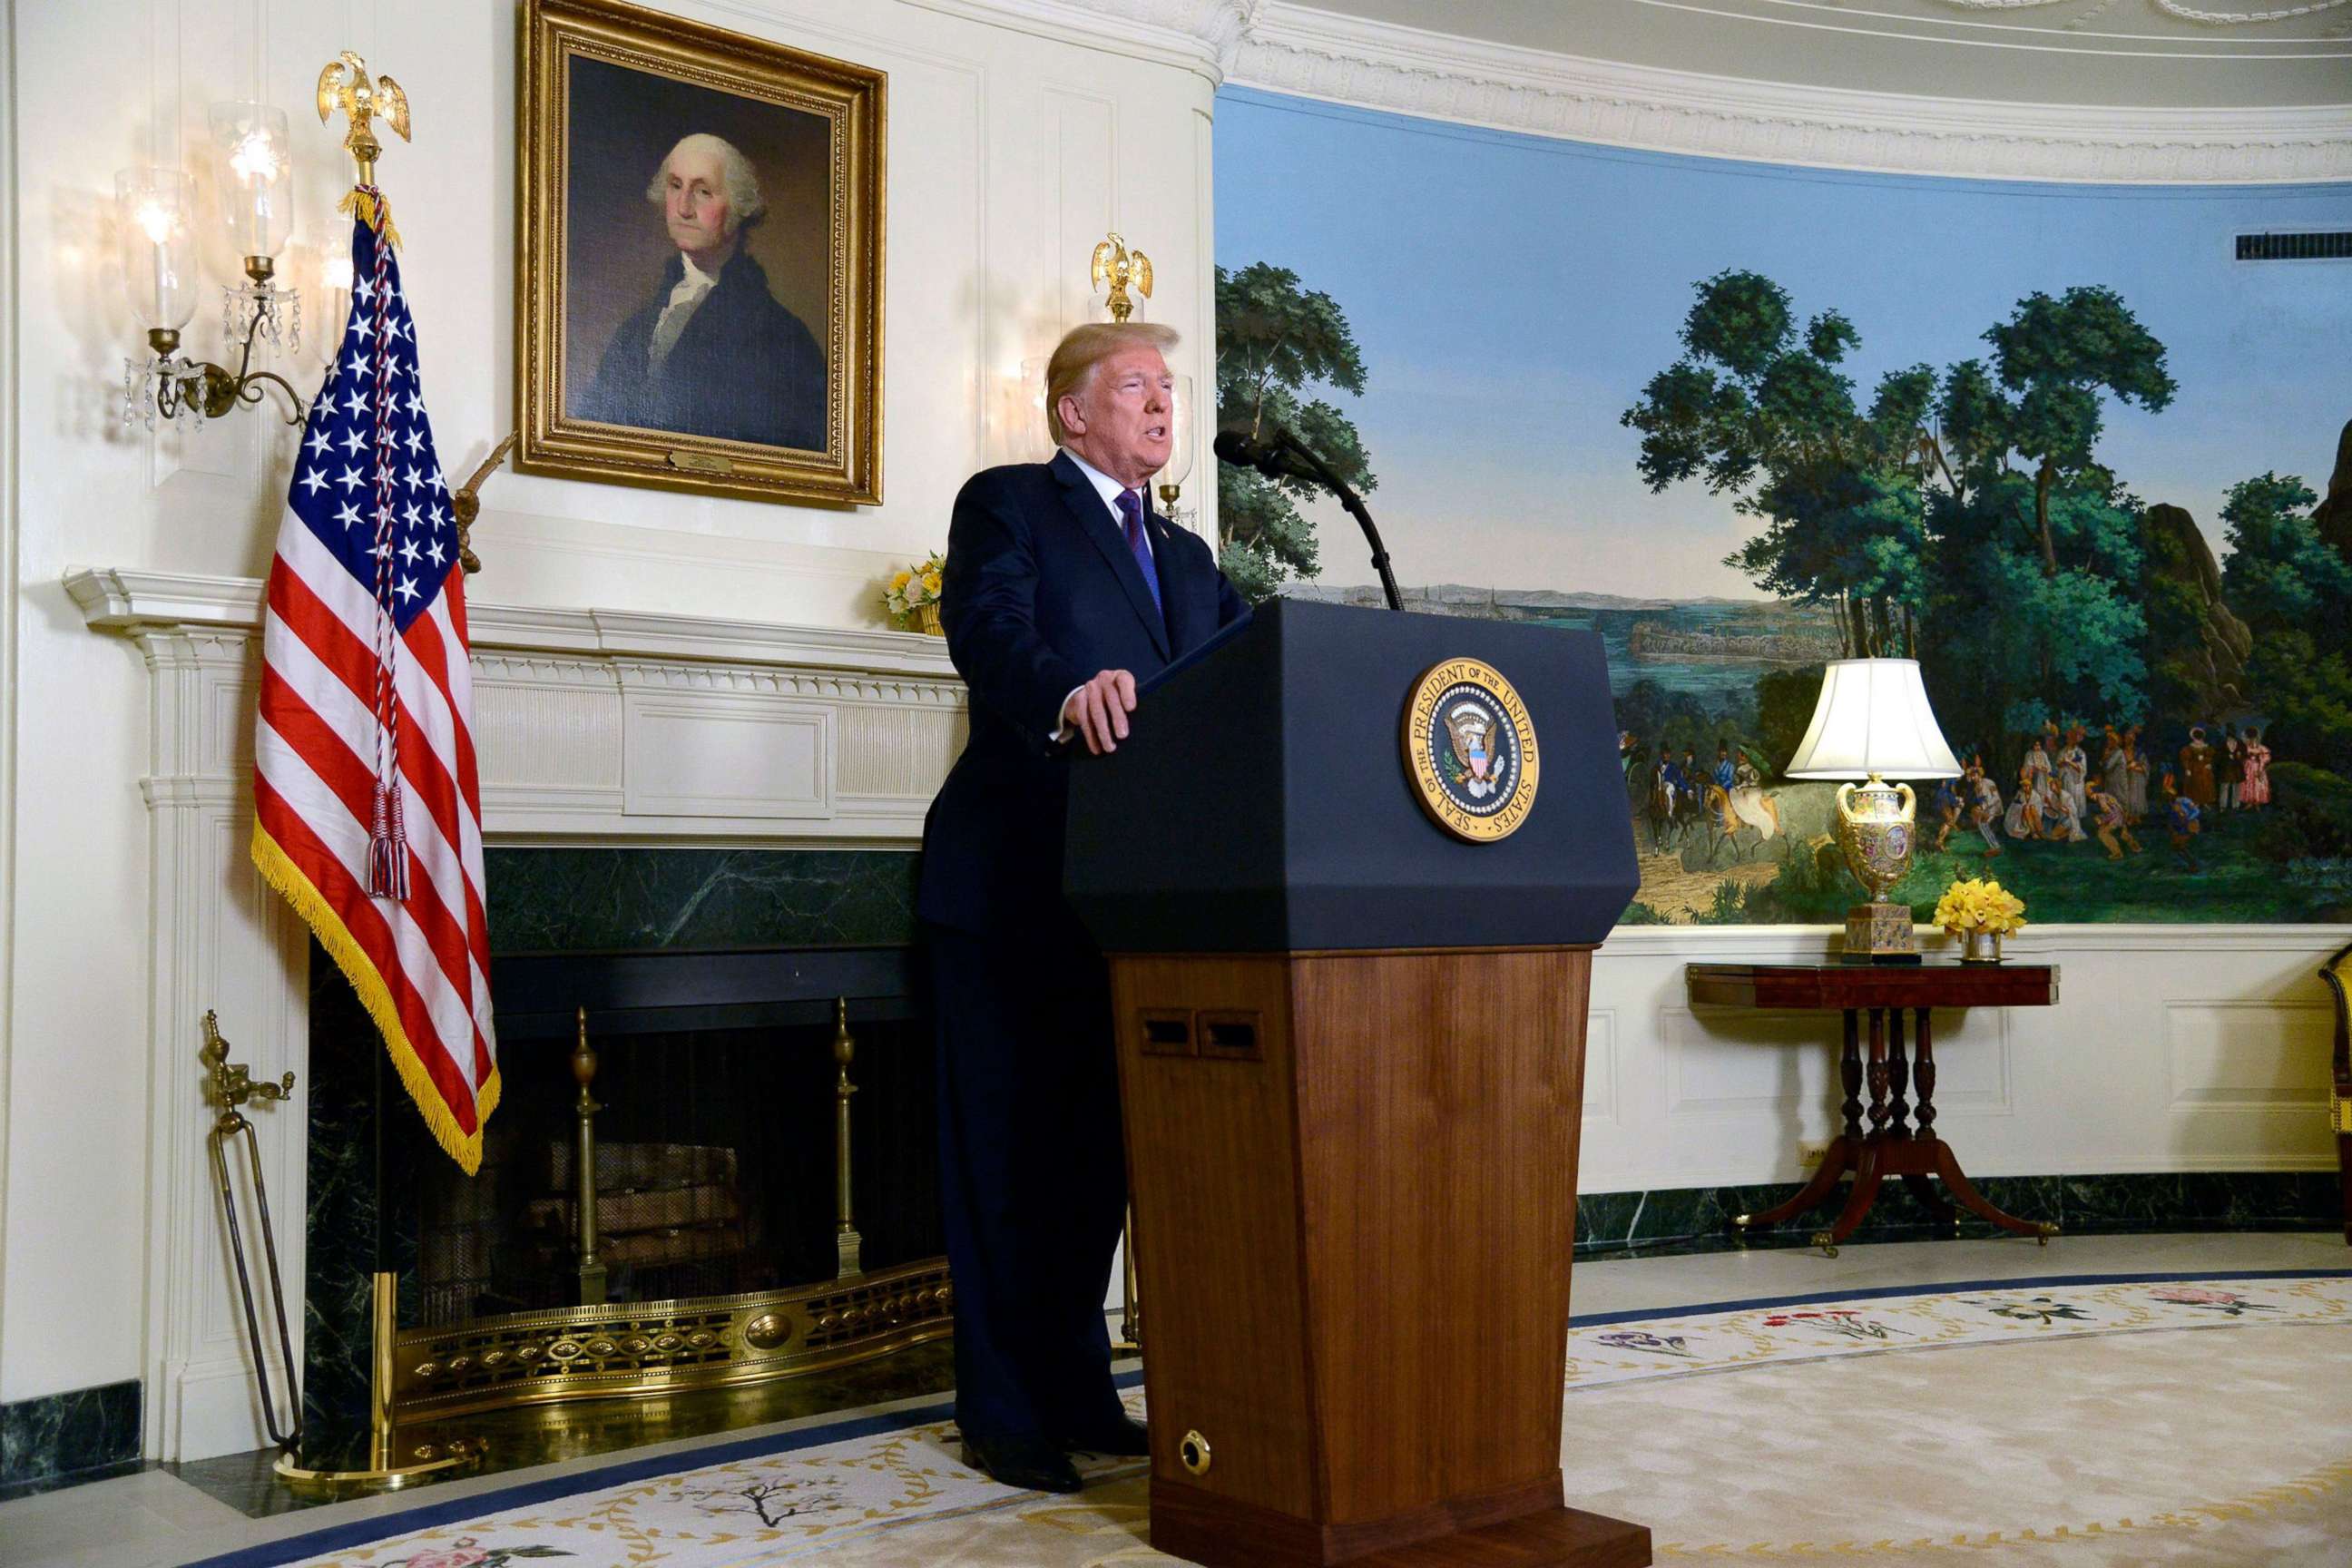 PHOTO: President Donald J. Trump announces military action against Syria in response to the recent alleged gas attack on civilians in Douma, at the White House, April 13, 2018.